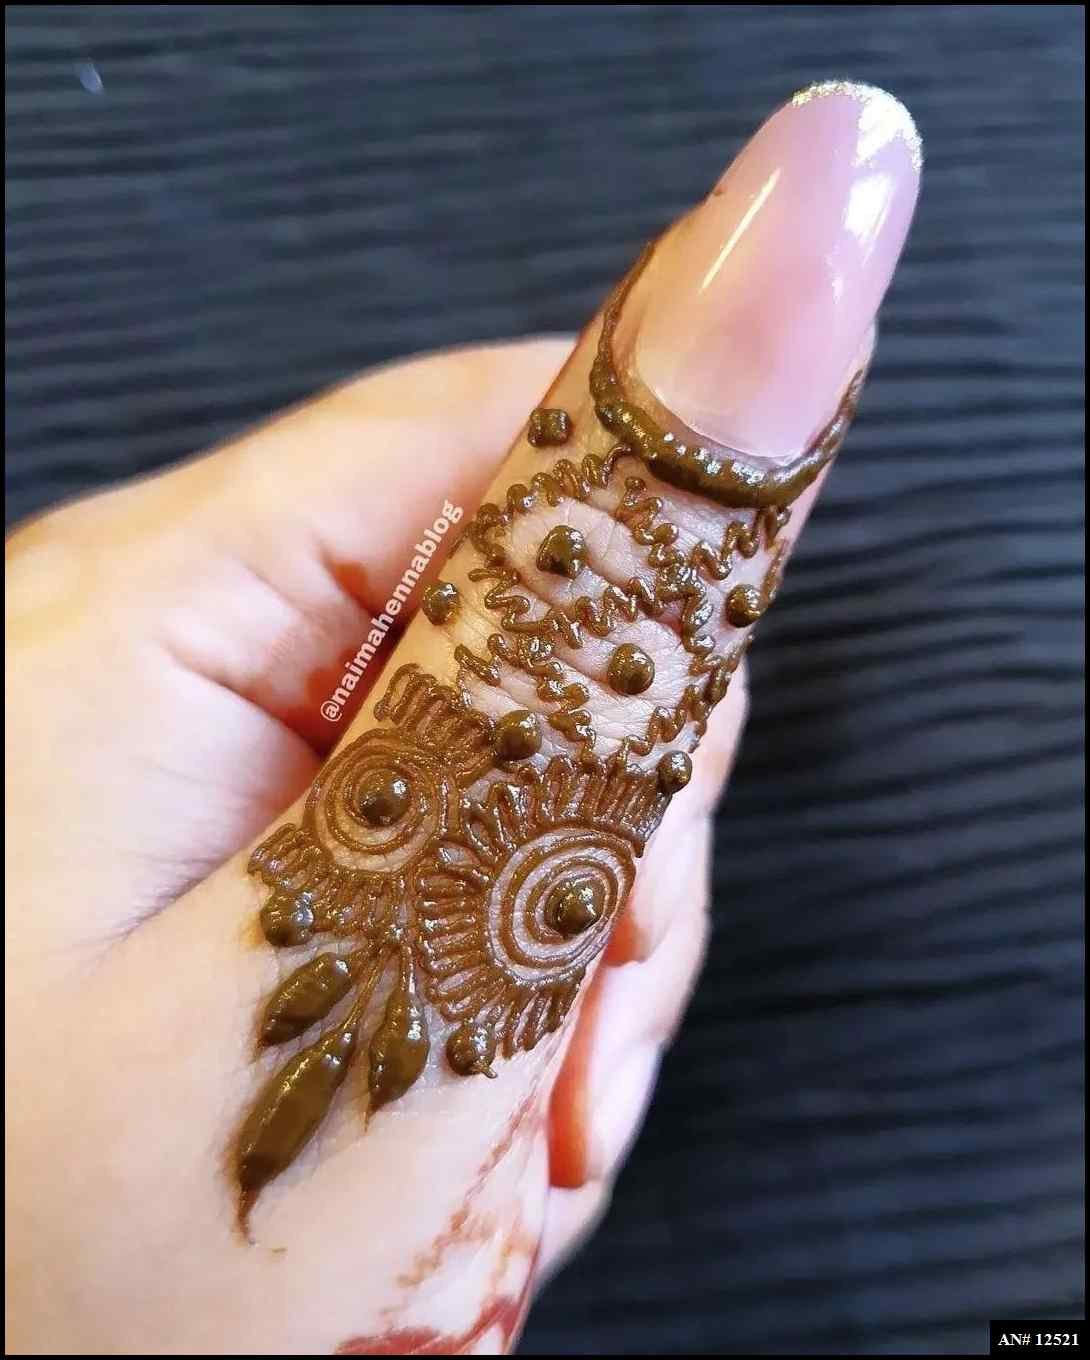 mehndi-designs-for-hands-simple-and-easy